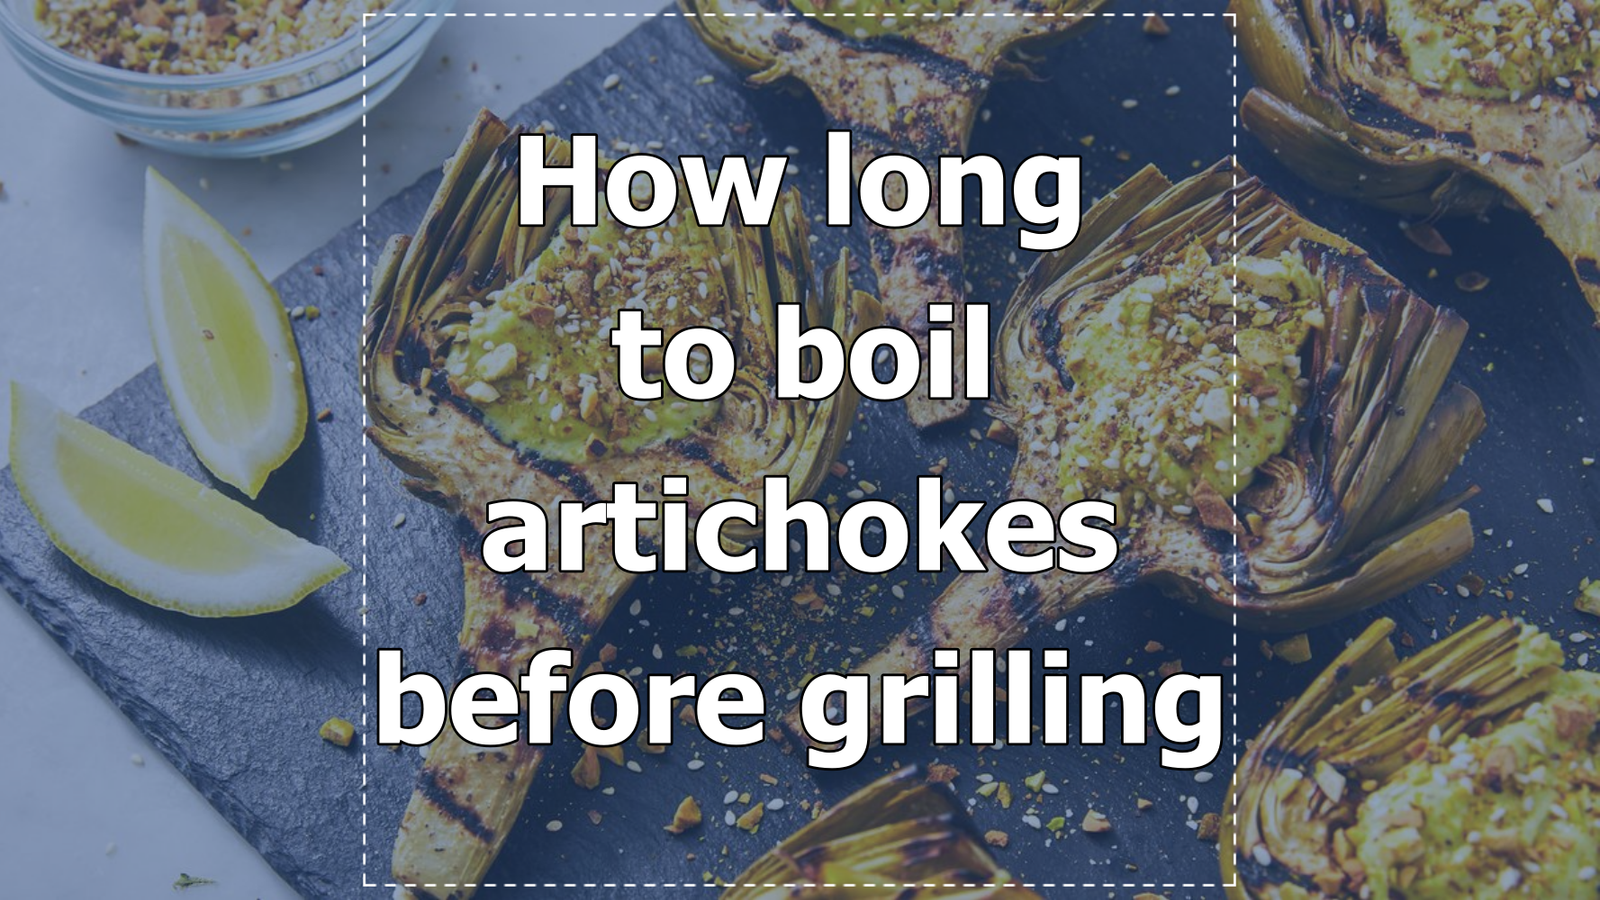 How long to boil artichokes before grilling